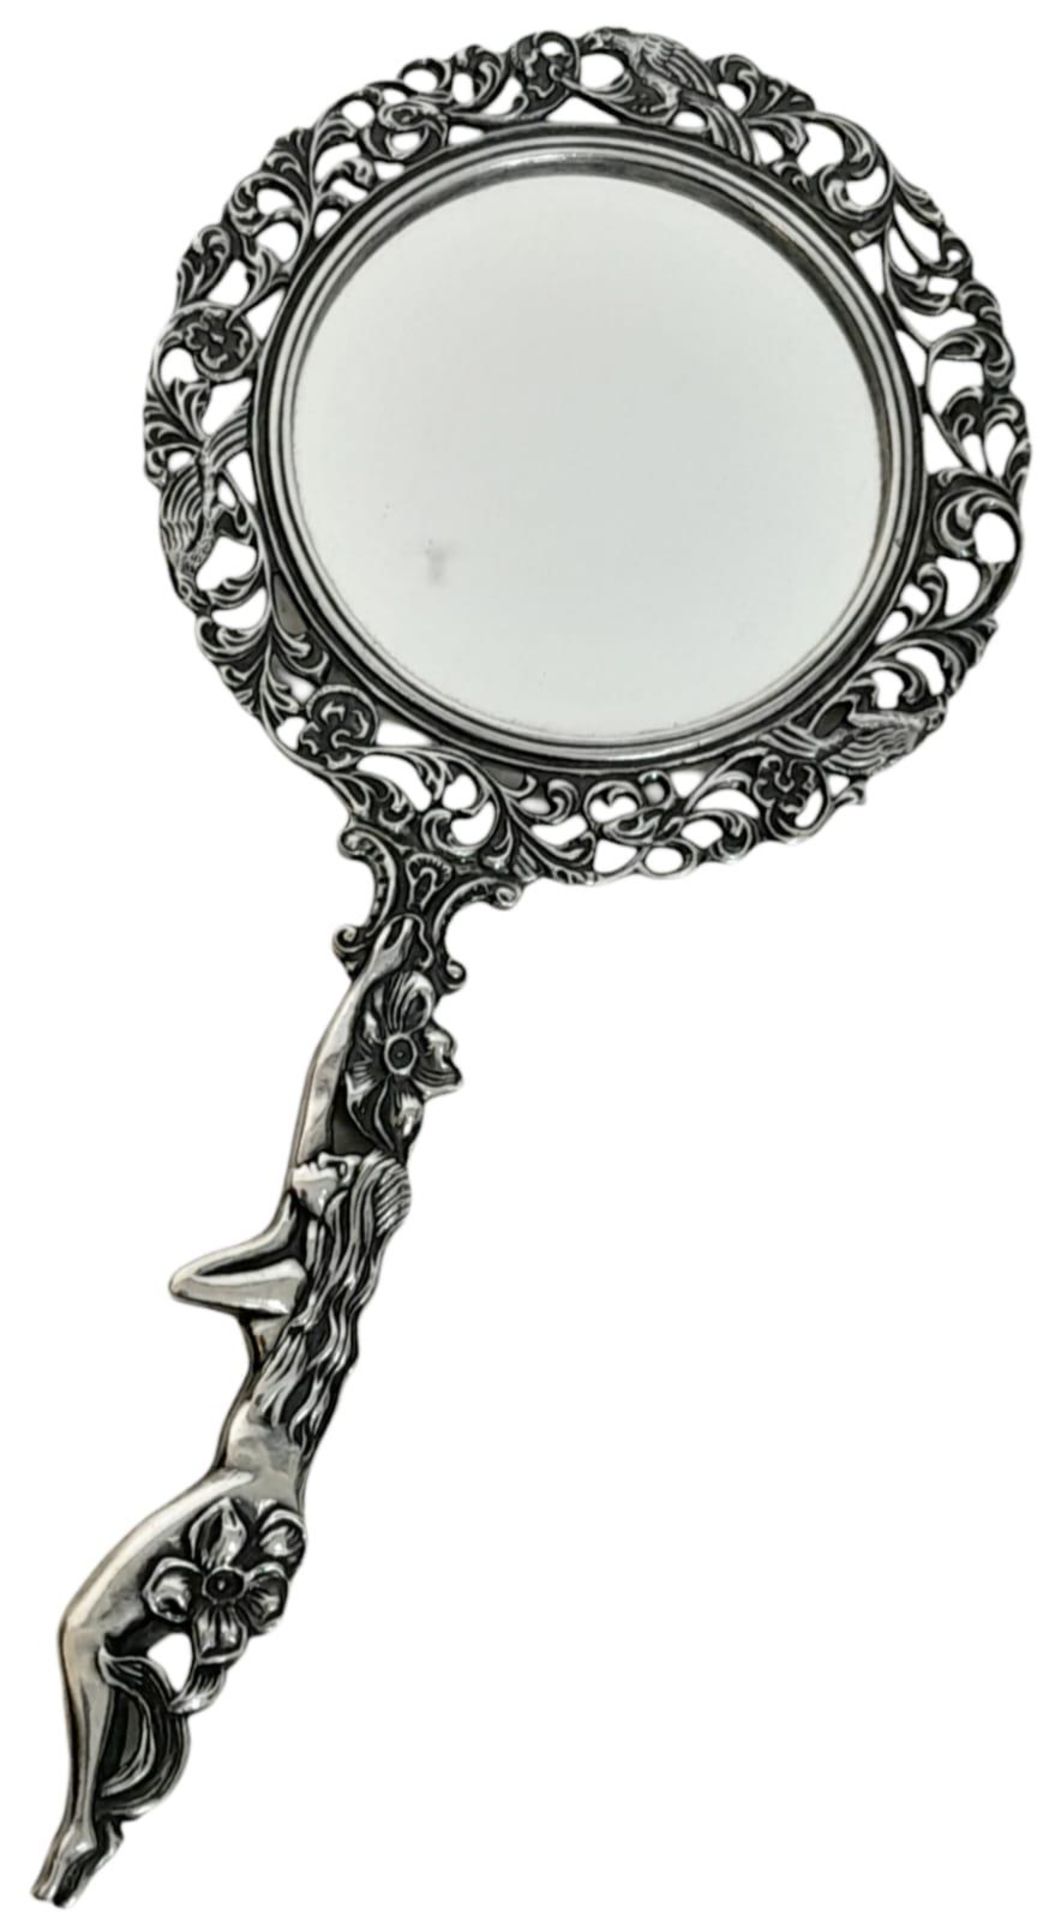 An Art Nouveau sterling silver vanity mirror, length: 16 cm, weight: 45 g.